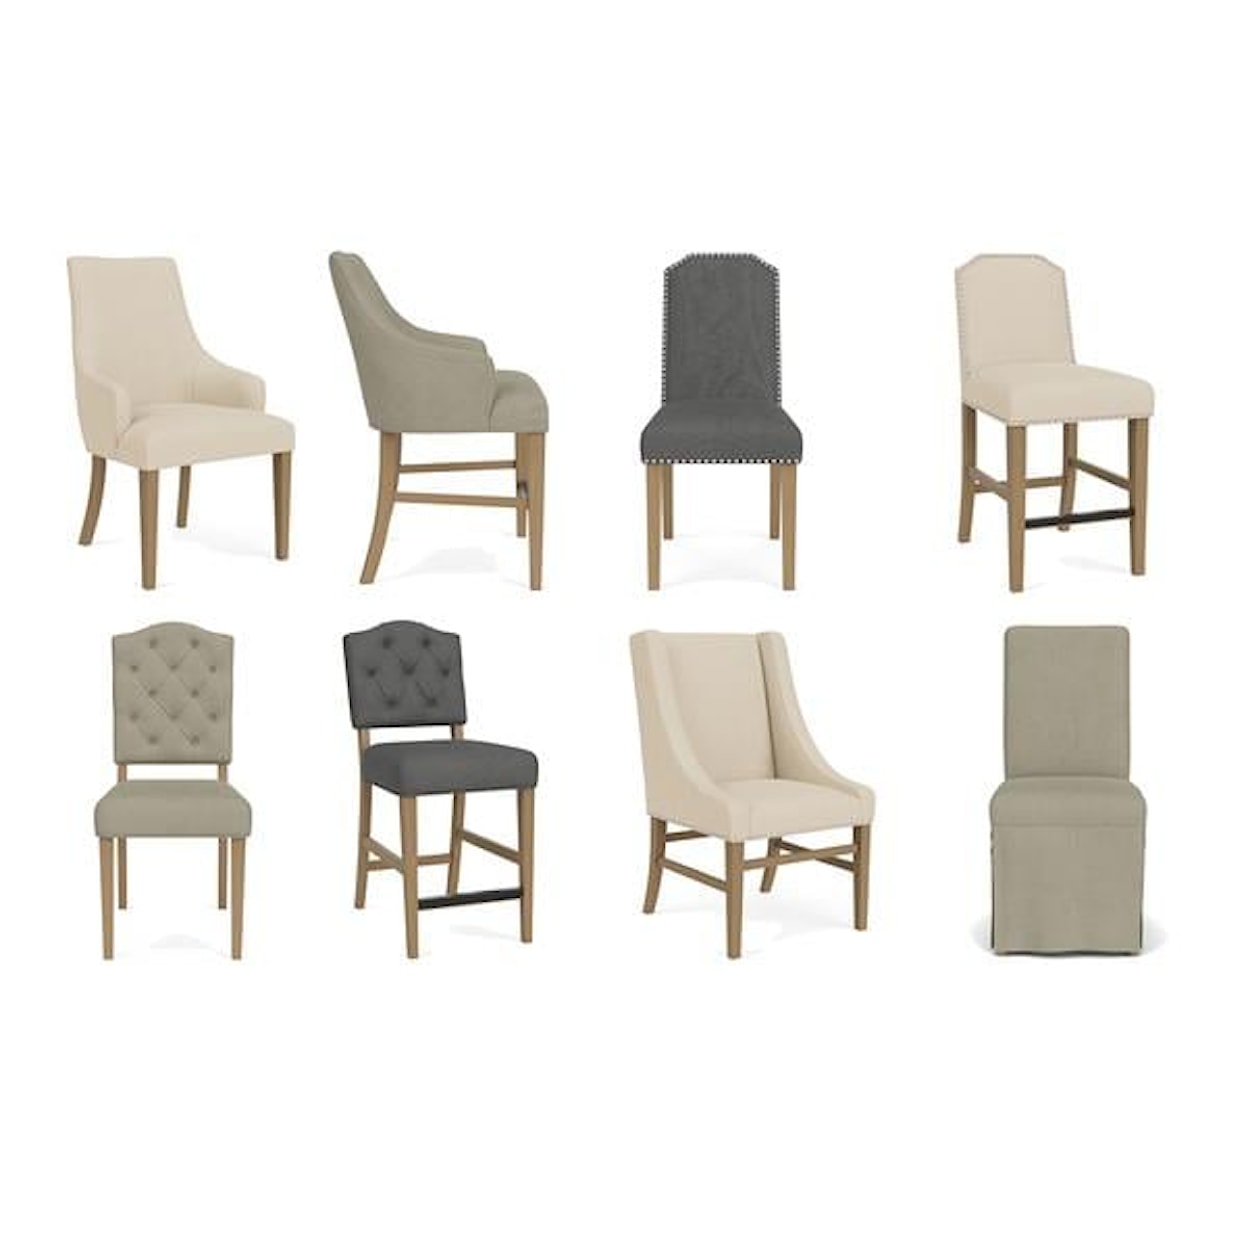 Riverside Furniture Mix-N-Match Chairs Upholstered Counter-Height Chair